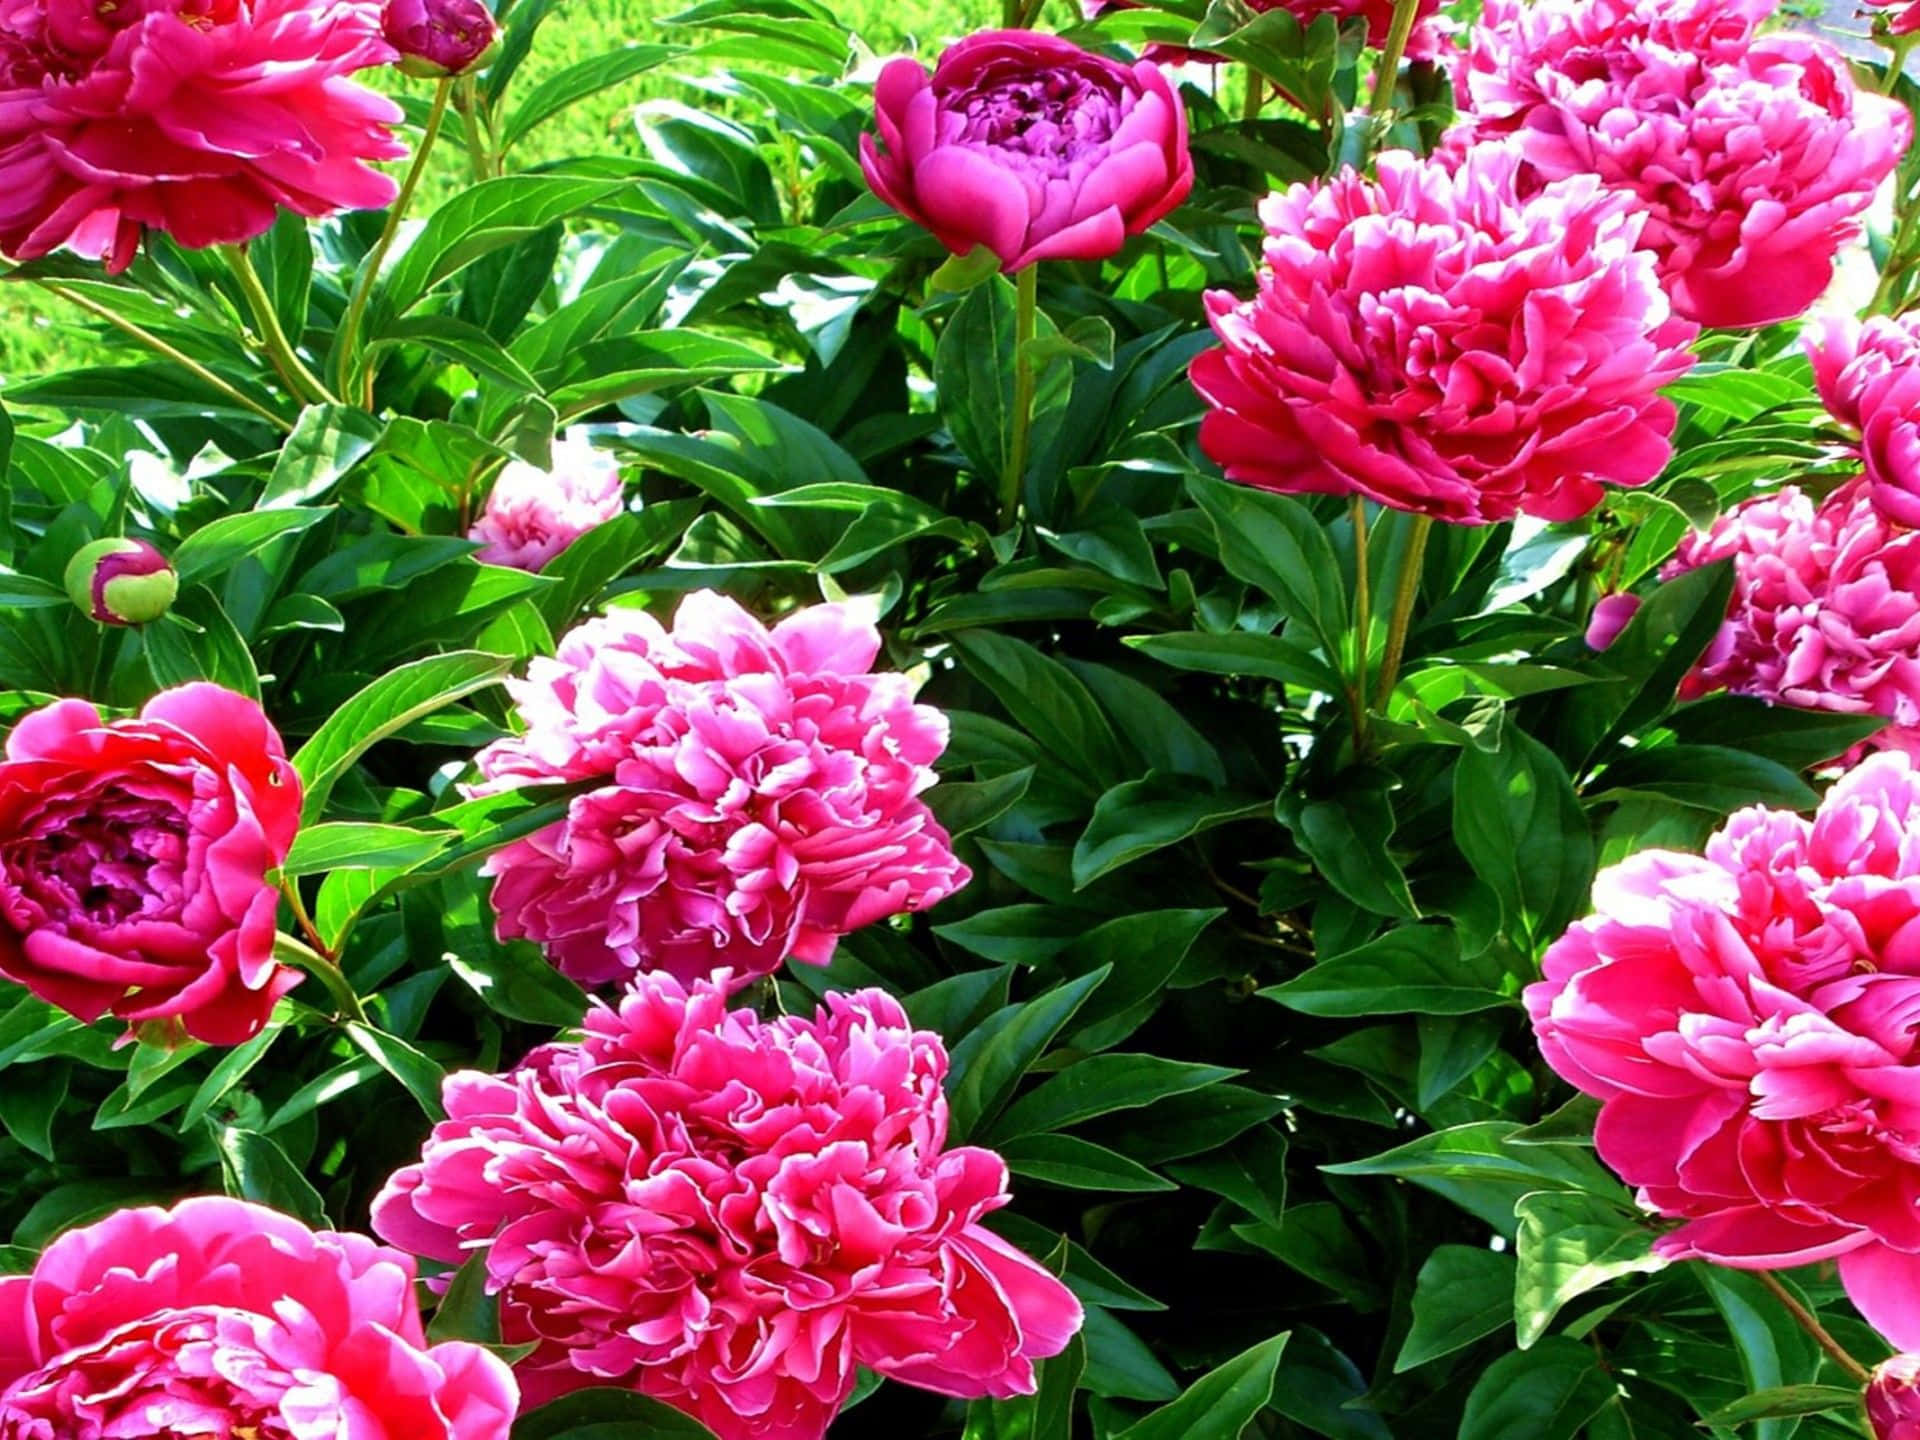 Colorful Peonies in a Pot